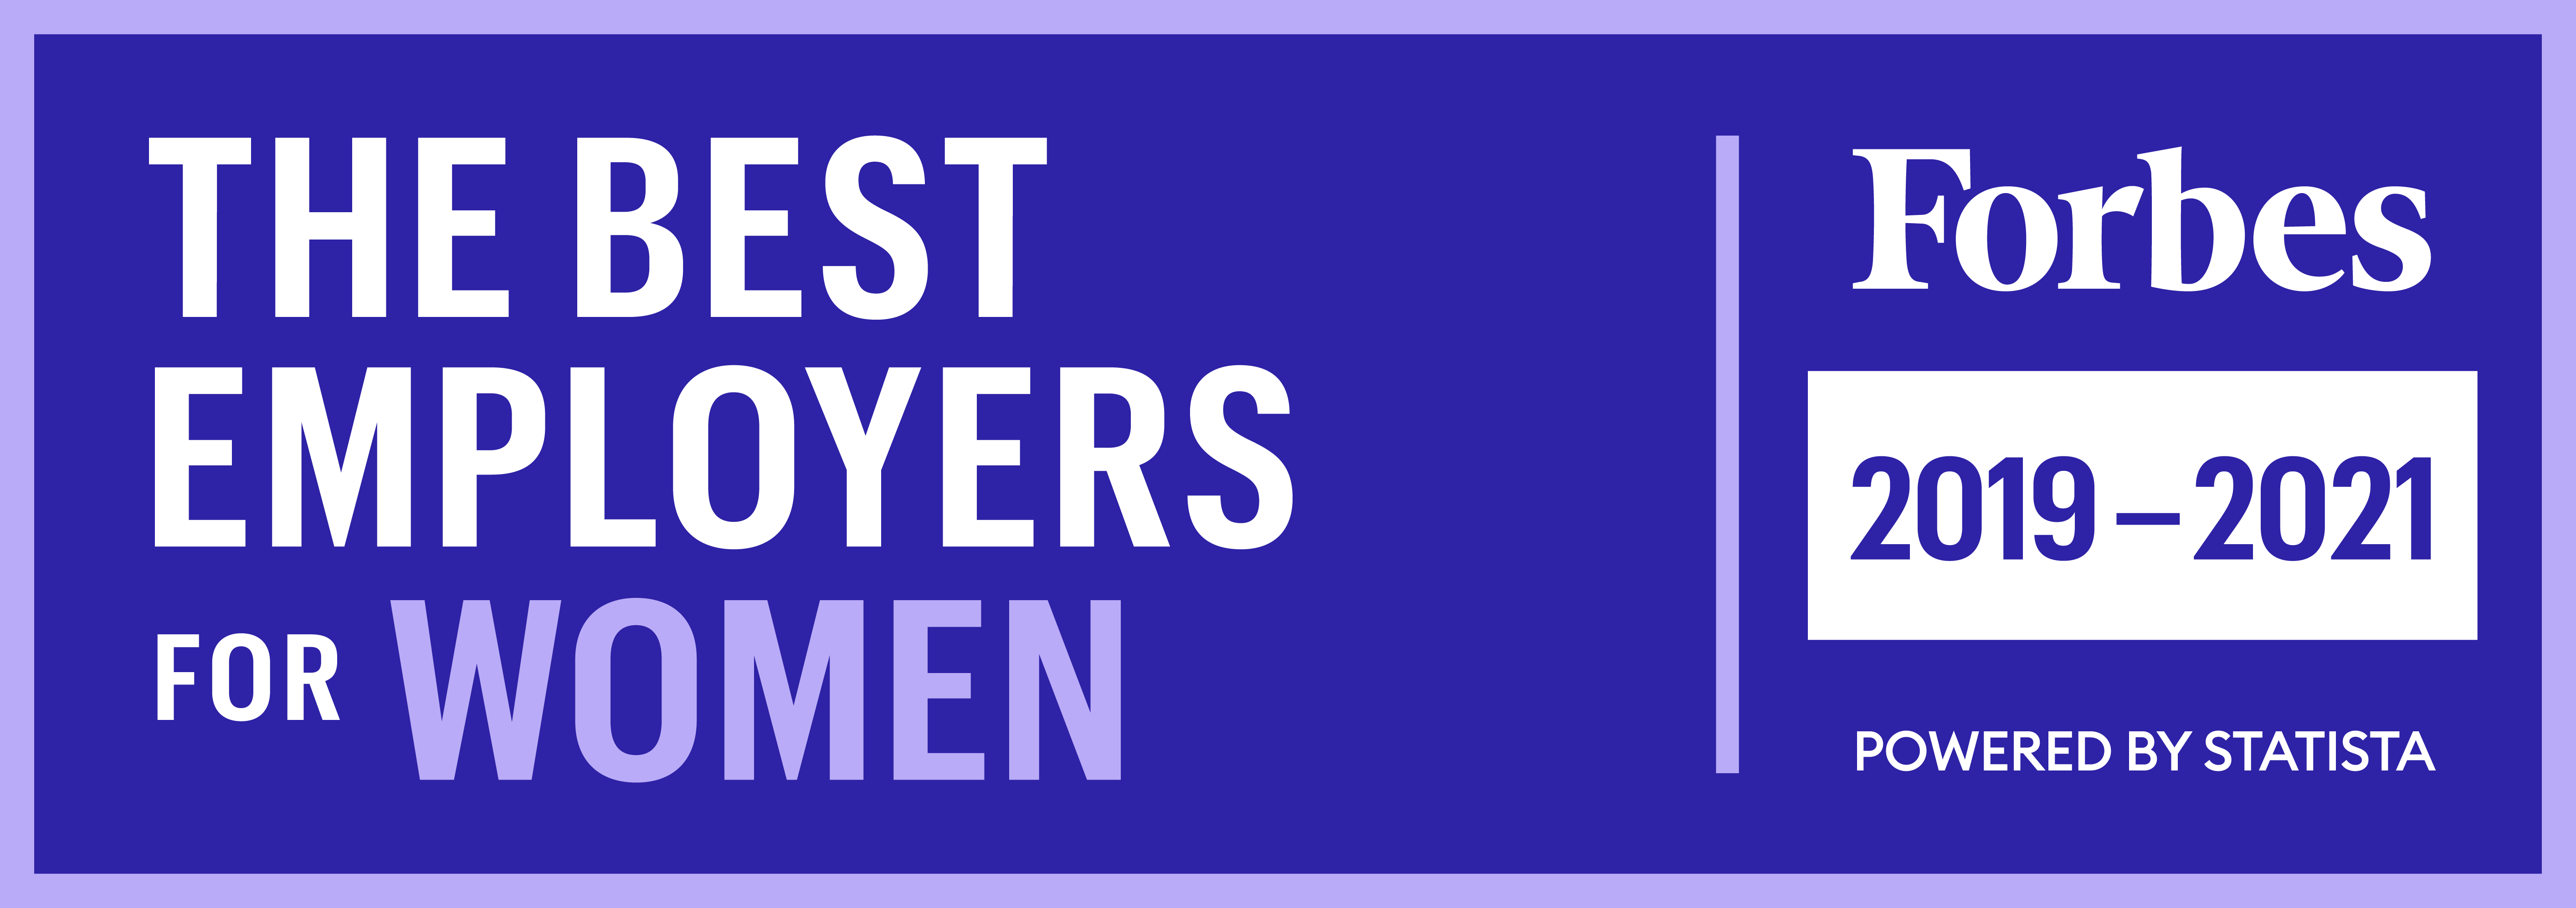 The Best Employers for Women 2019 - 2021